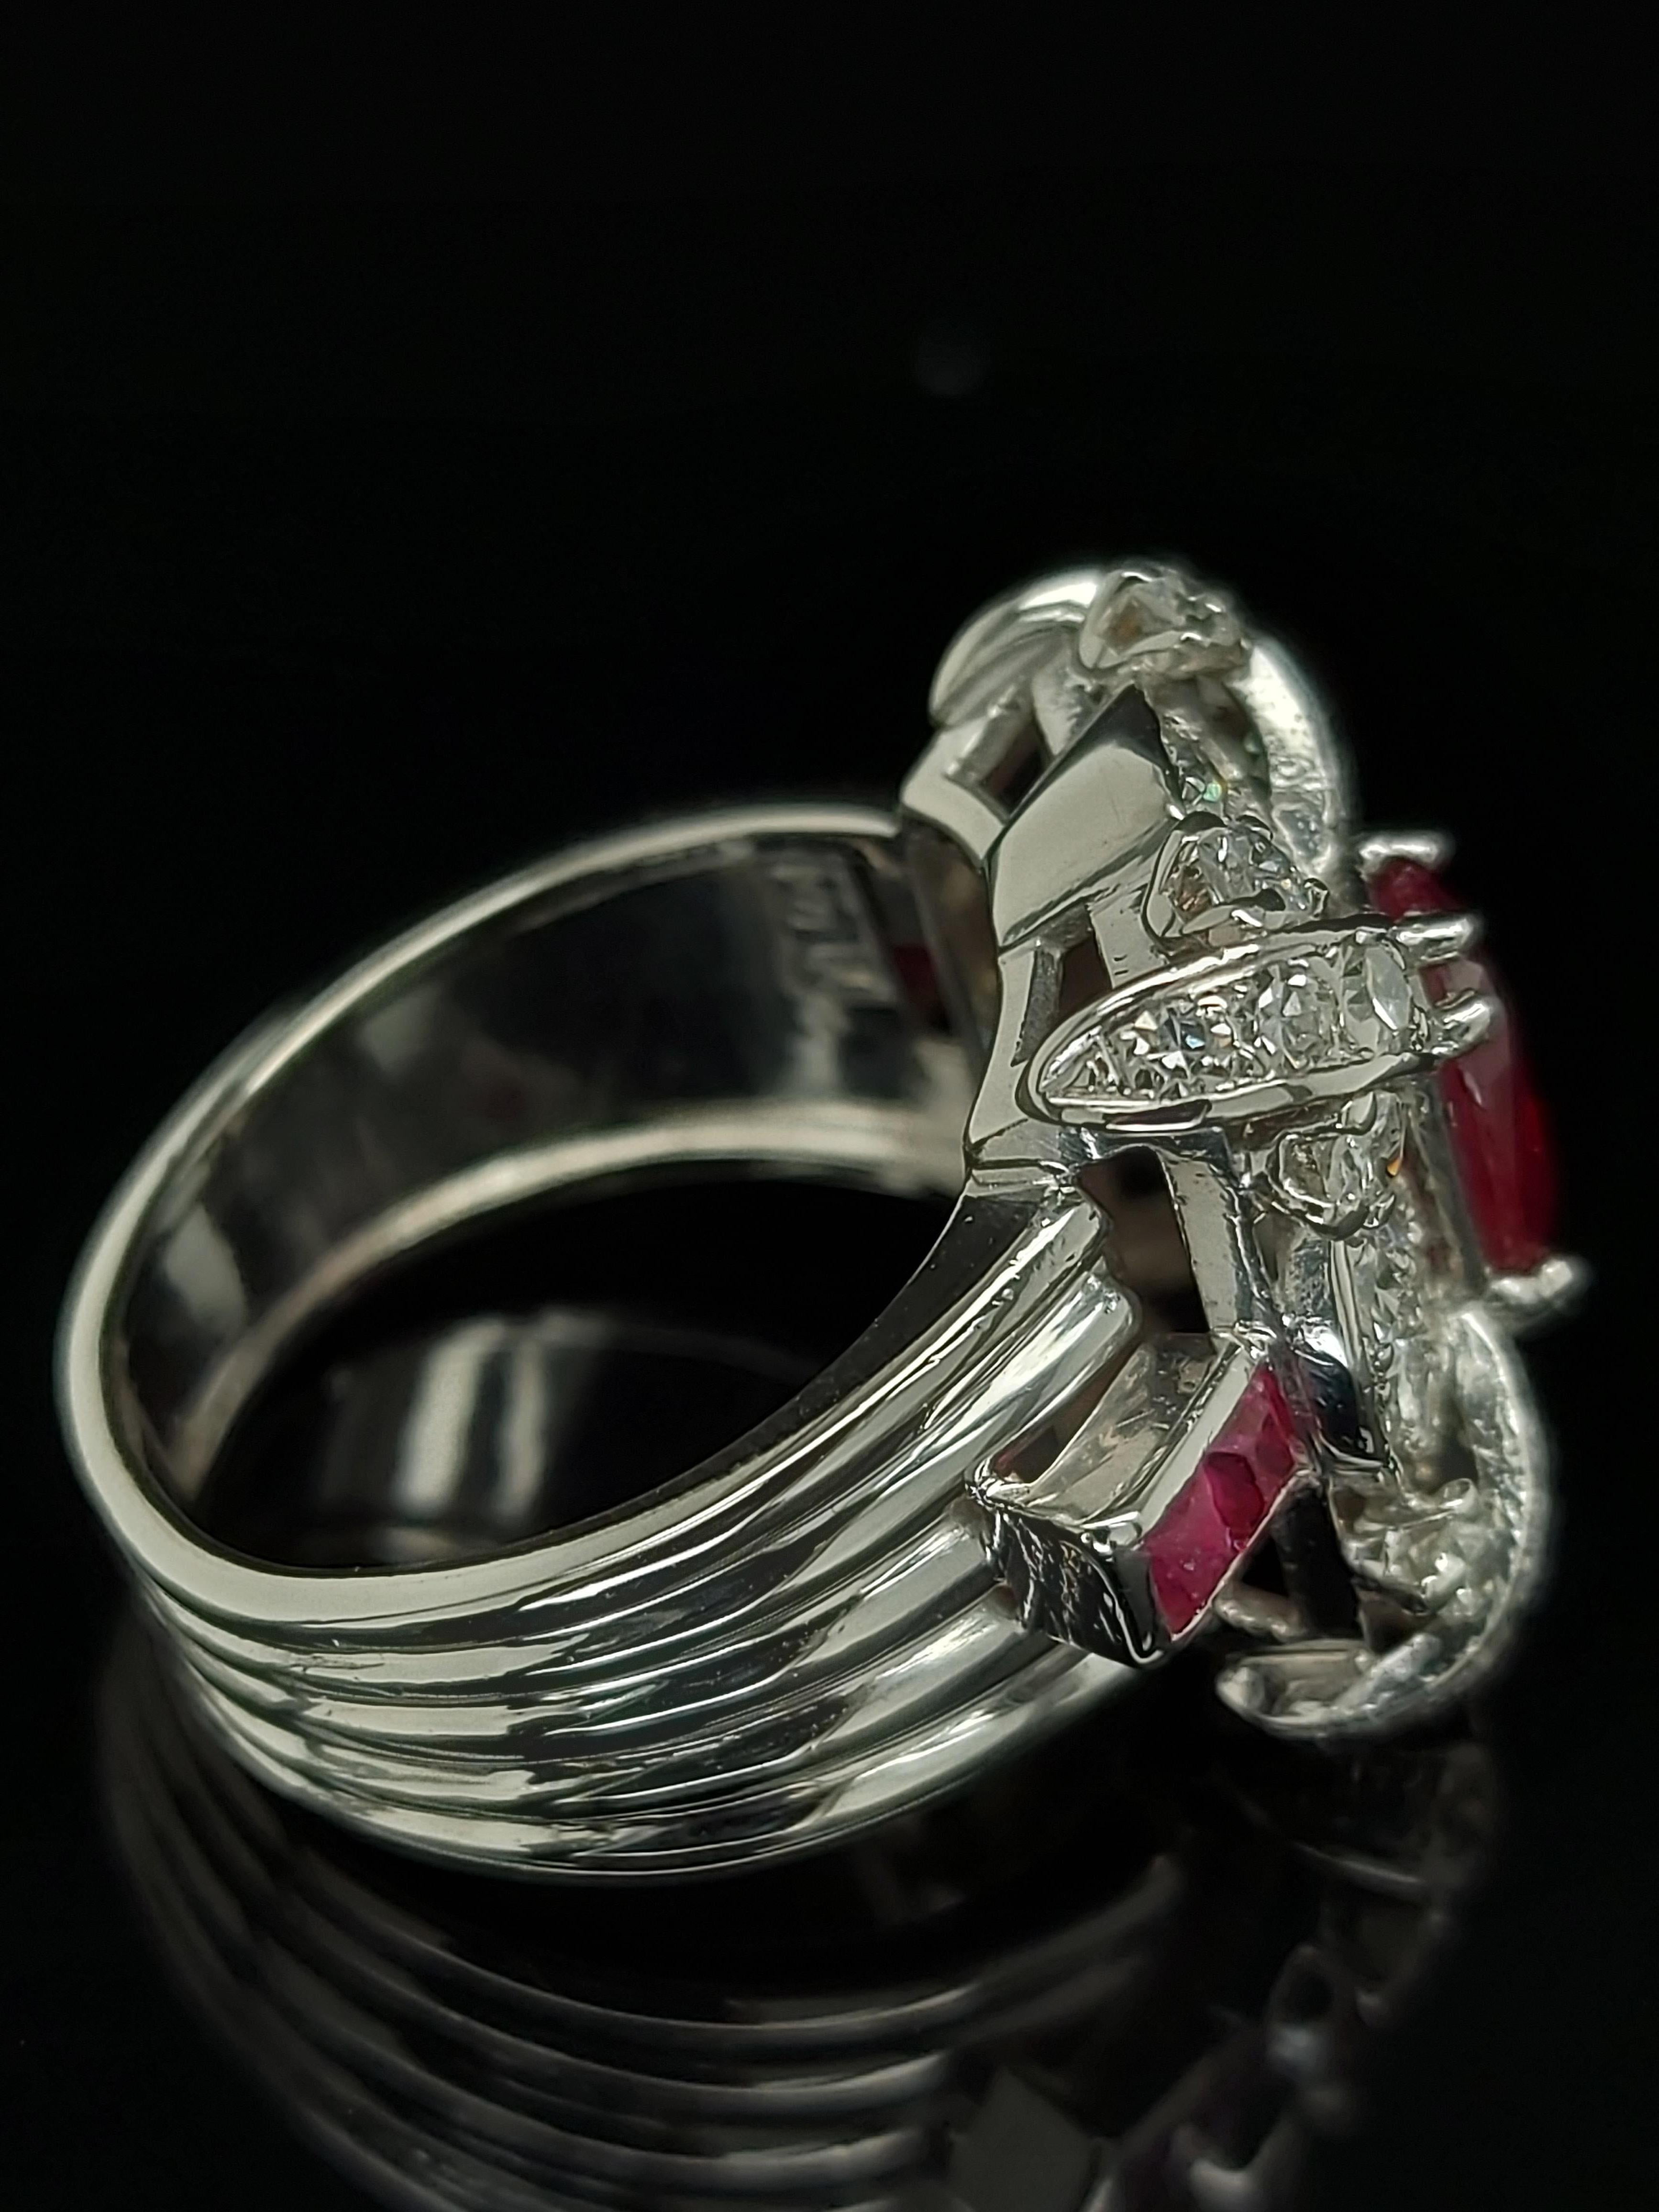 Stunning platinum ring with 1.14 ct ruby and ca.2ct  diamonds 

Diamonds: 44 eight cut round diamonds ca.2 ct 

Ruby: 1,14 ct

Material: Solid Platinum

Total weight: 11,7 grams / 0.415 oz / 7.5 dwt

Ring size 52 ( free resizing)

Measurements: 19.5